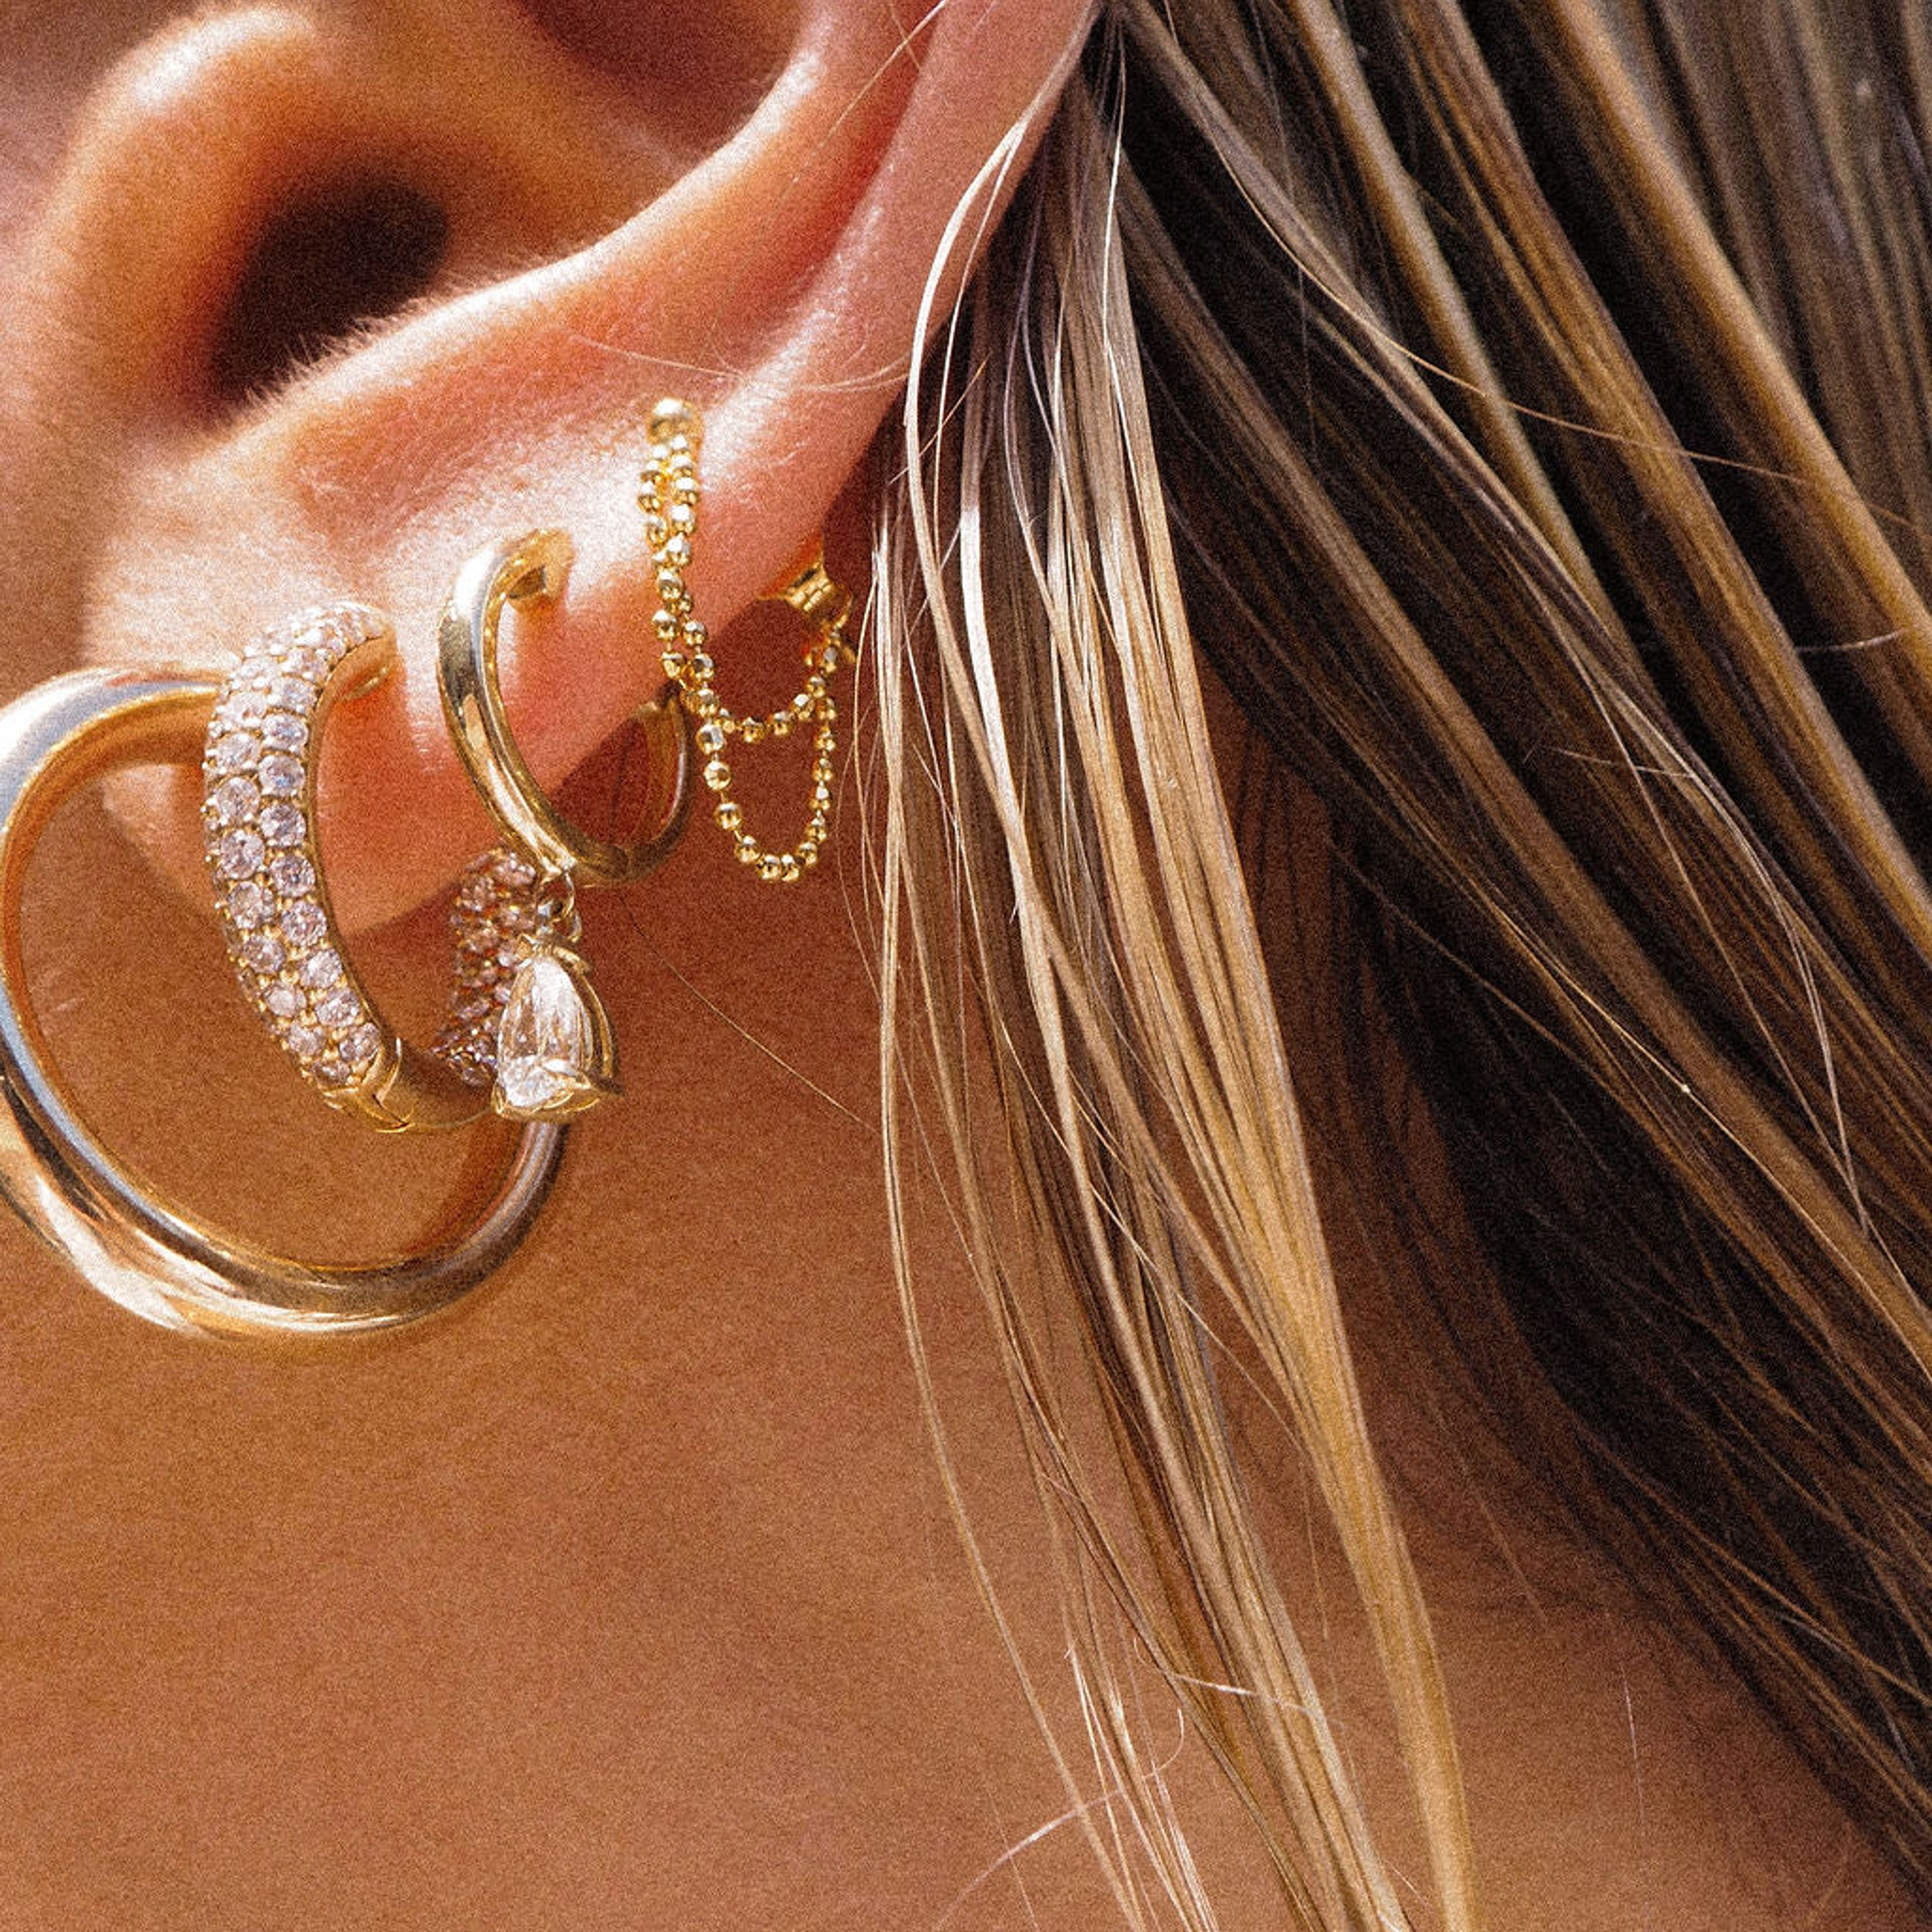 The Double Ball Chain Studs